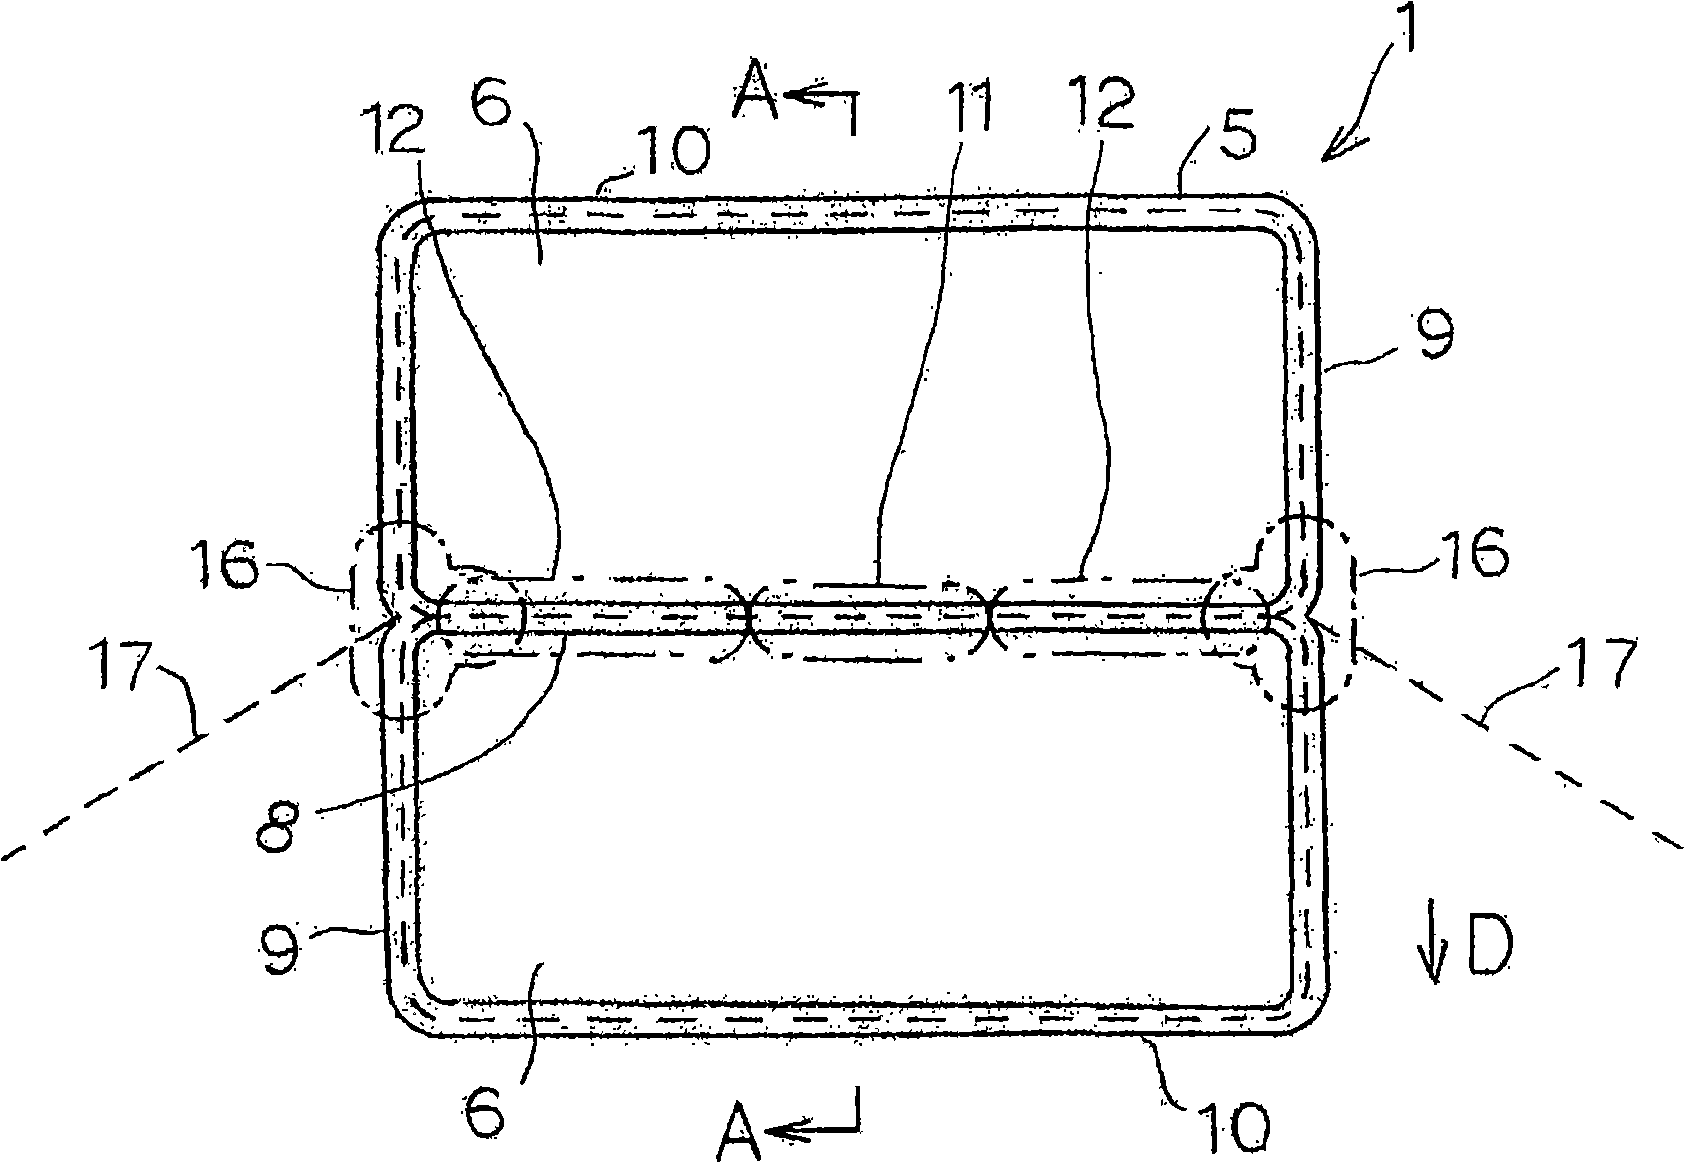 Airbag door, method of controlling breakage of tear line, and method of expanding airbag